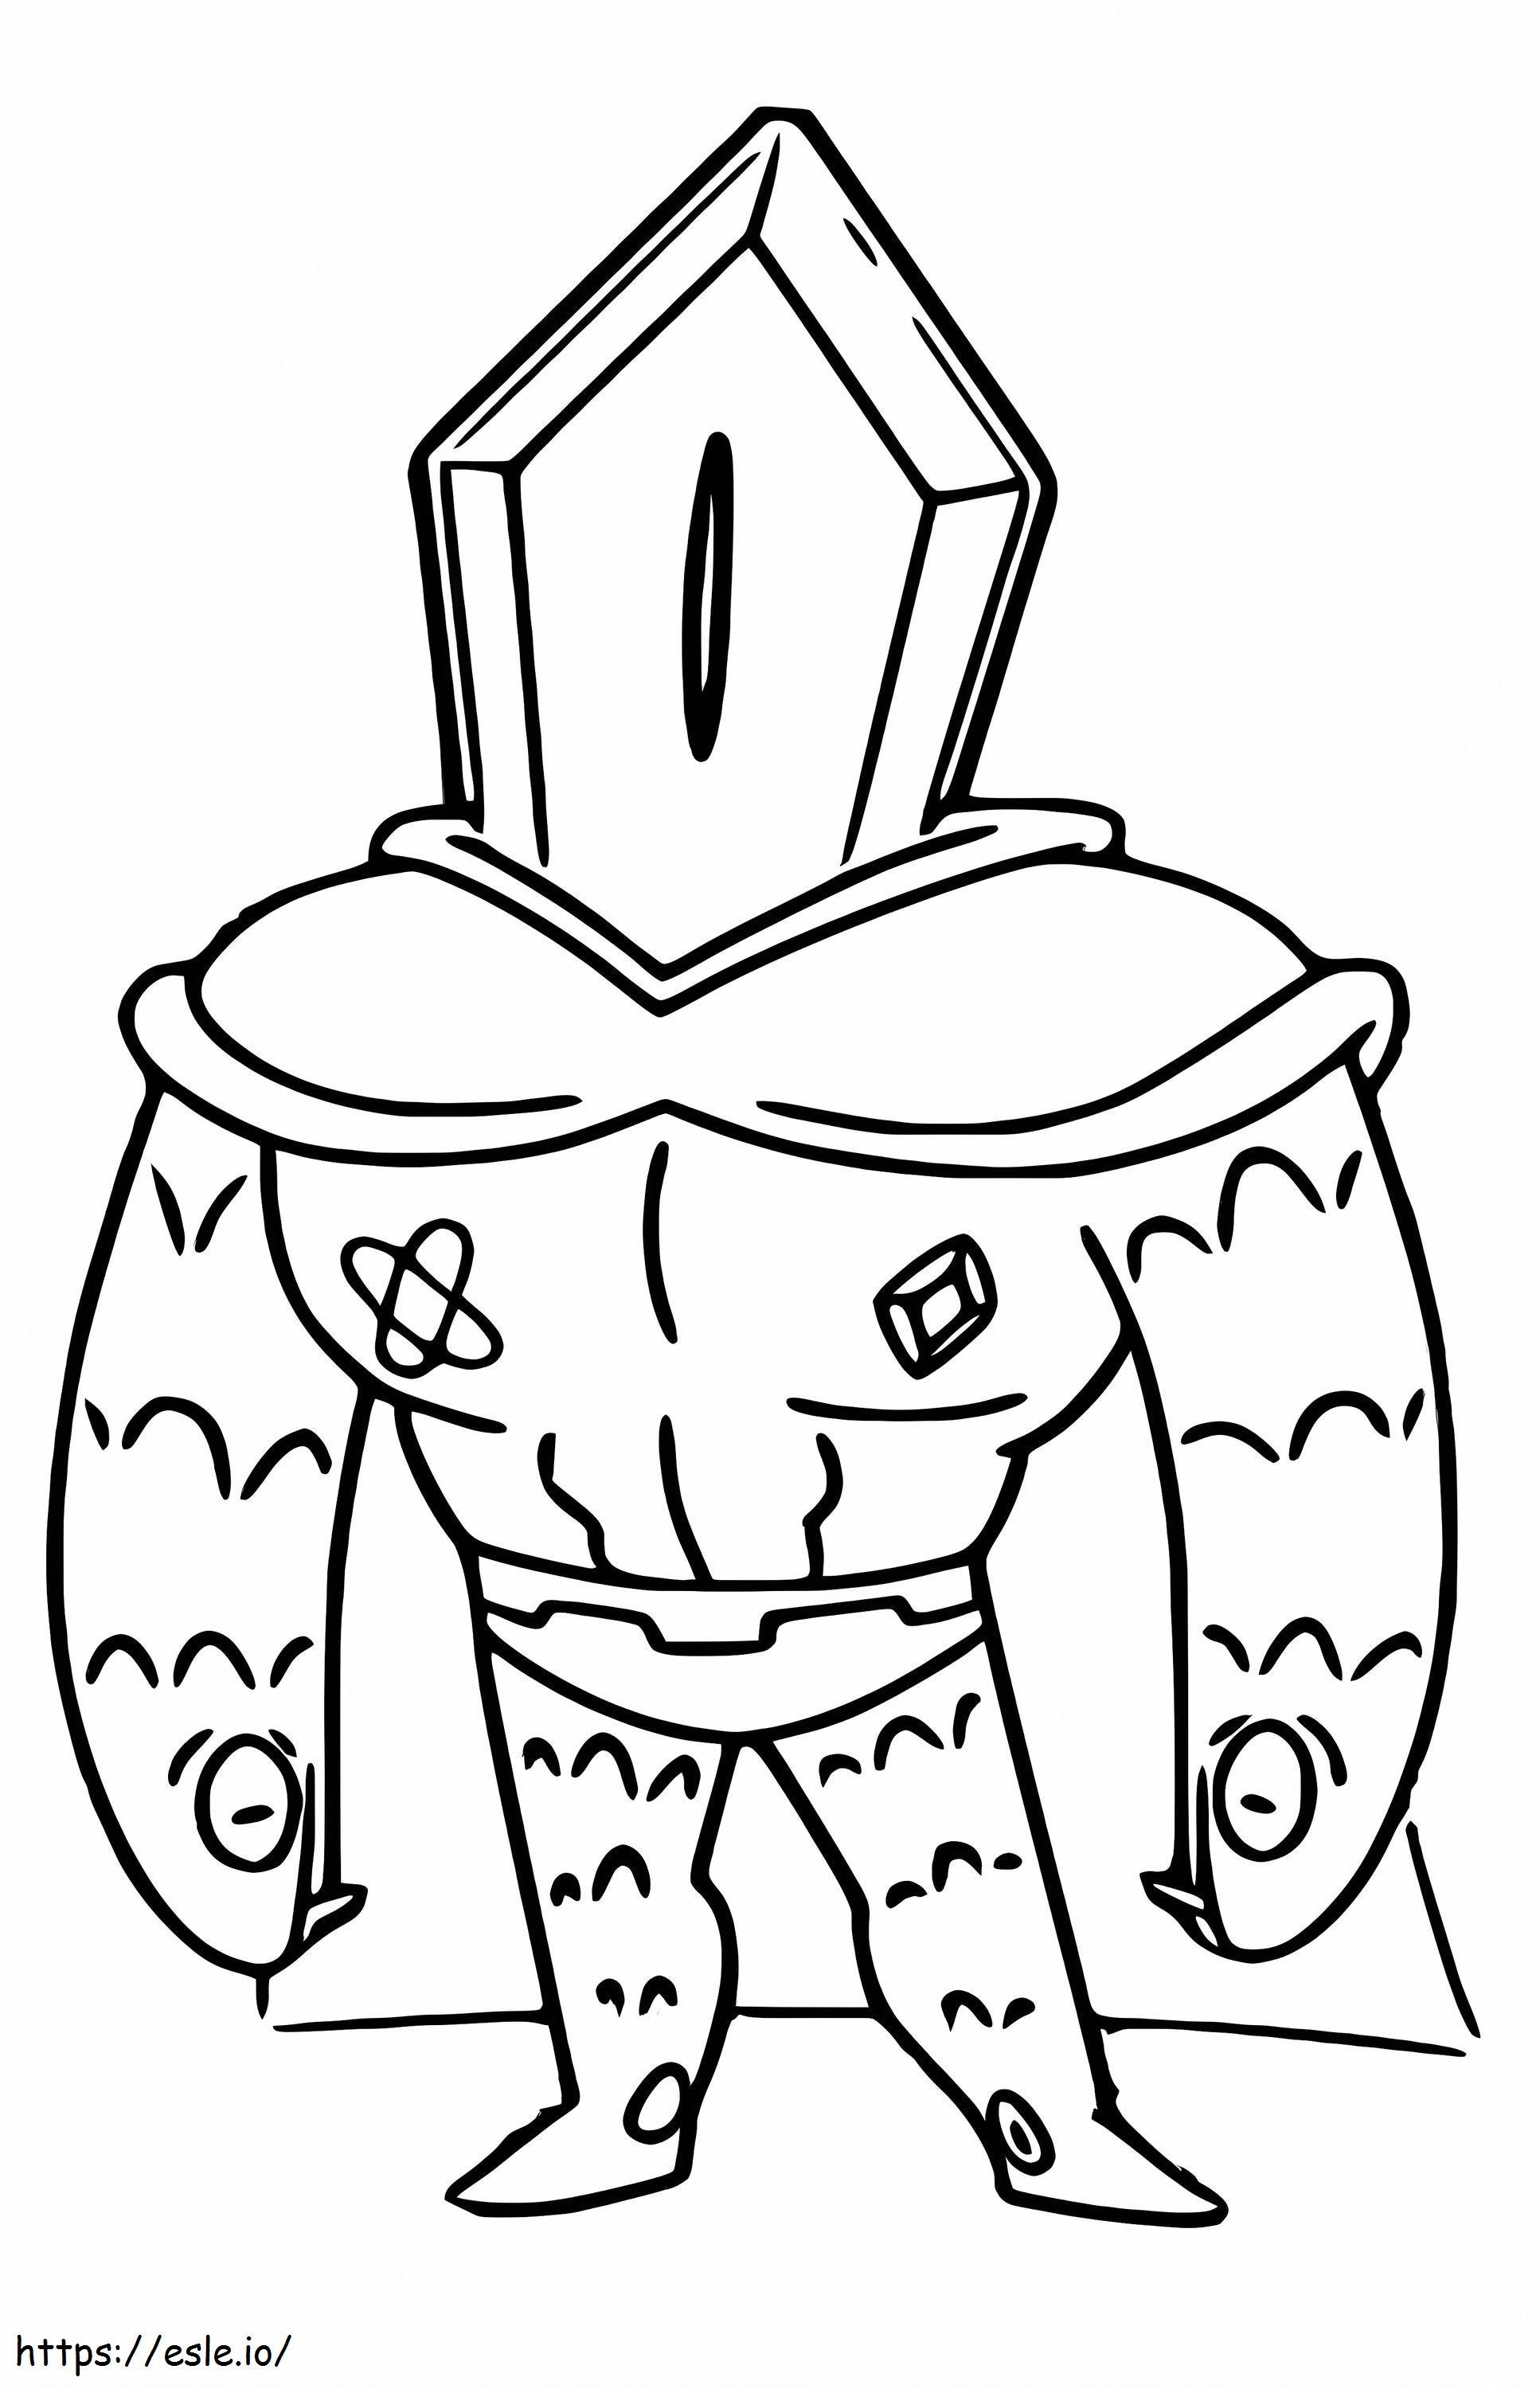 Rhombulus coloring page